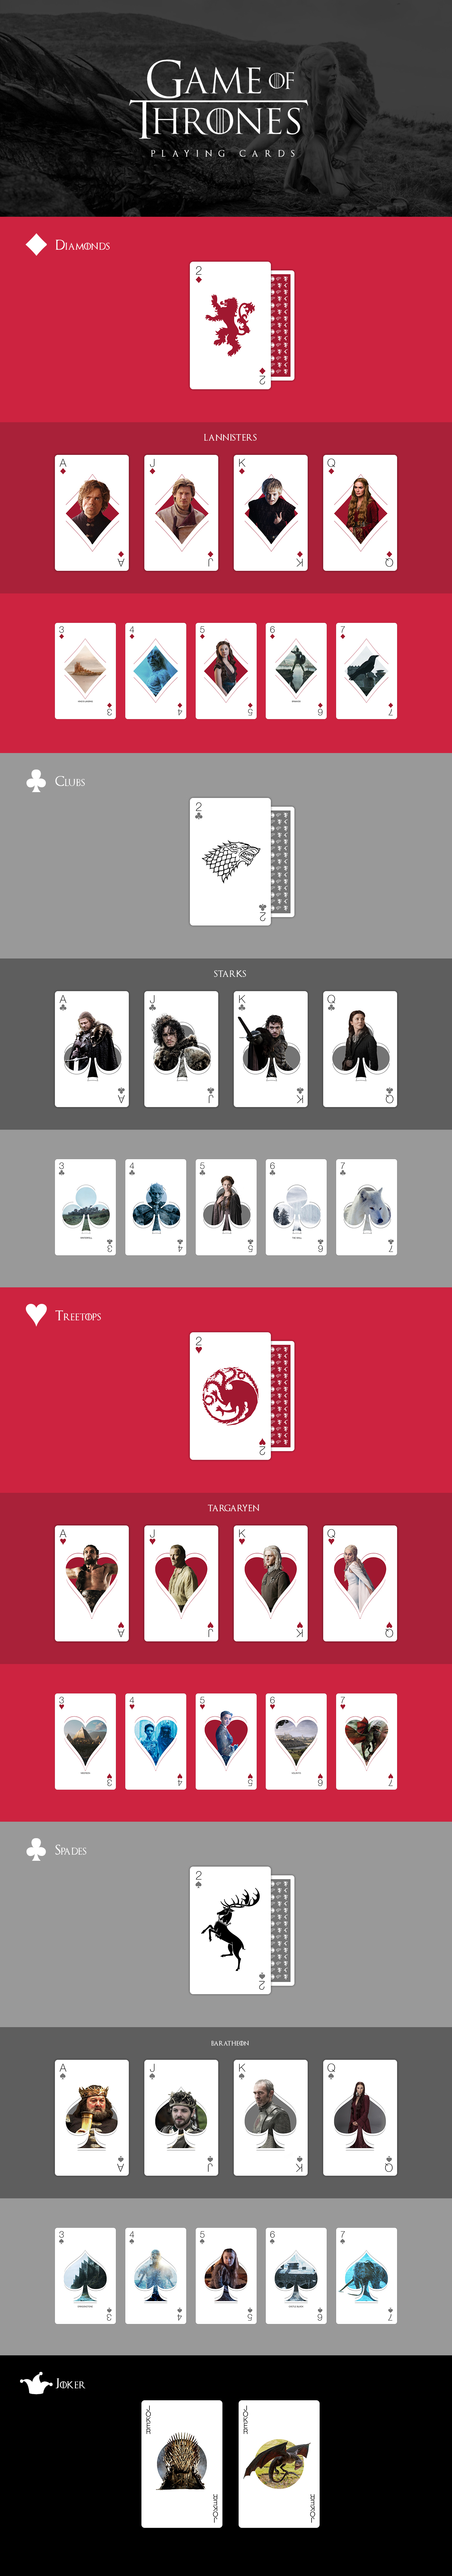 Game of Thrones Playing Cards Baralho truco Jon Snow